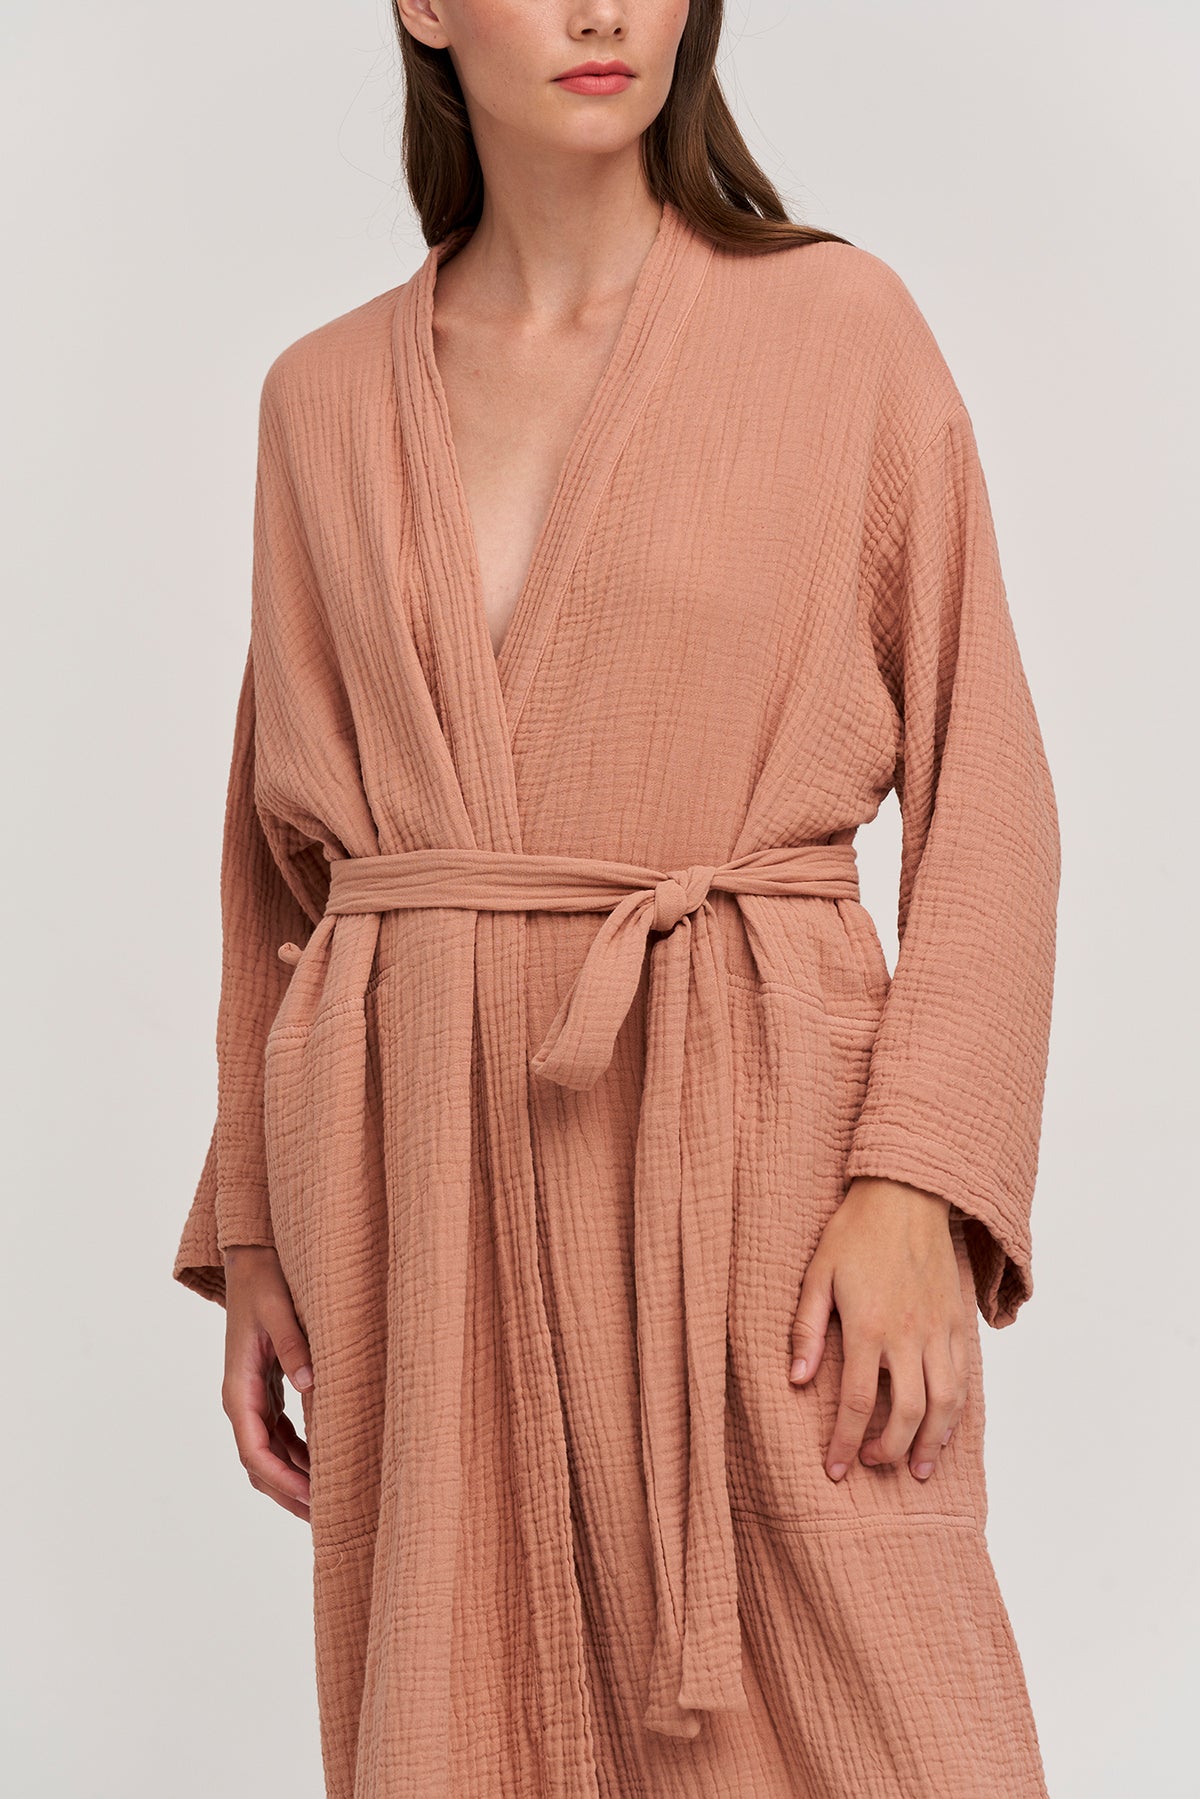   Cotton Robe Posey Front Detail 